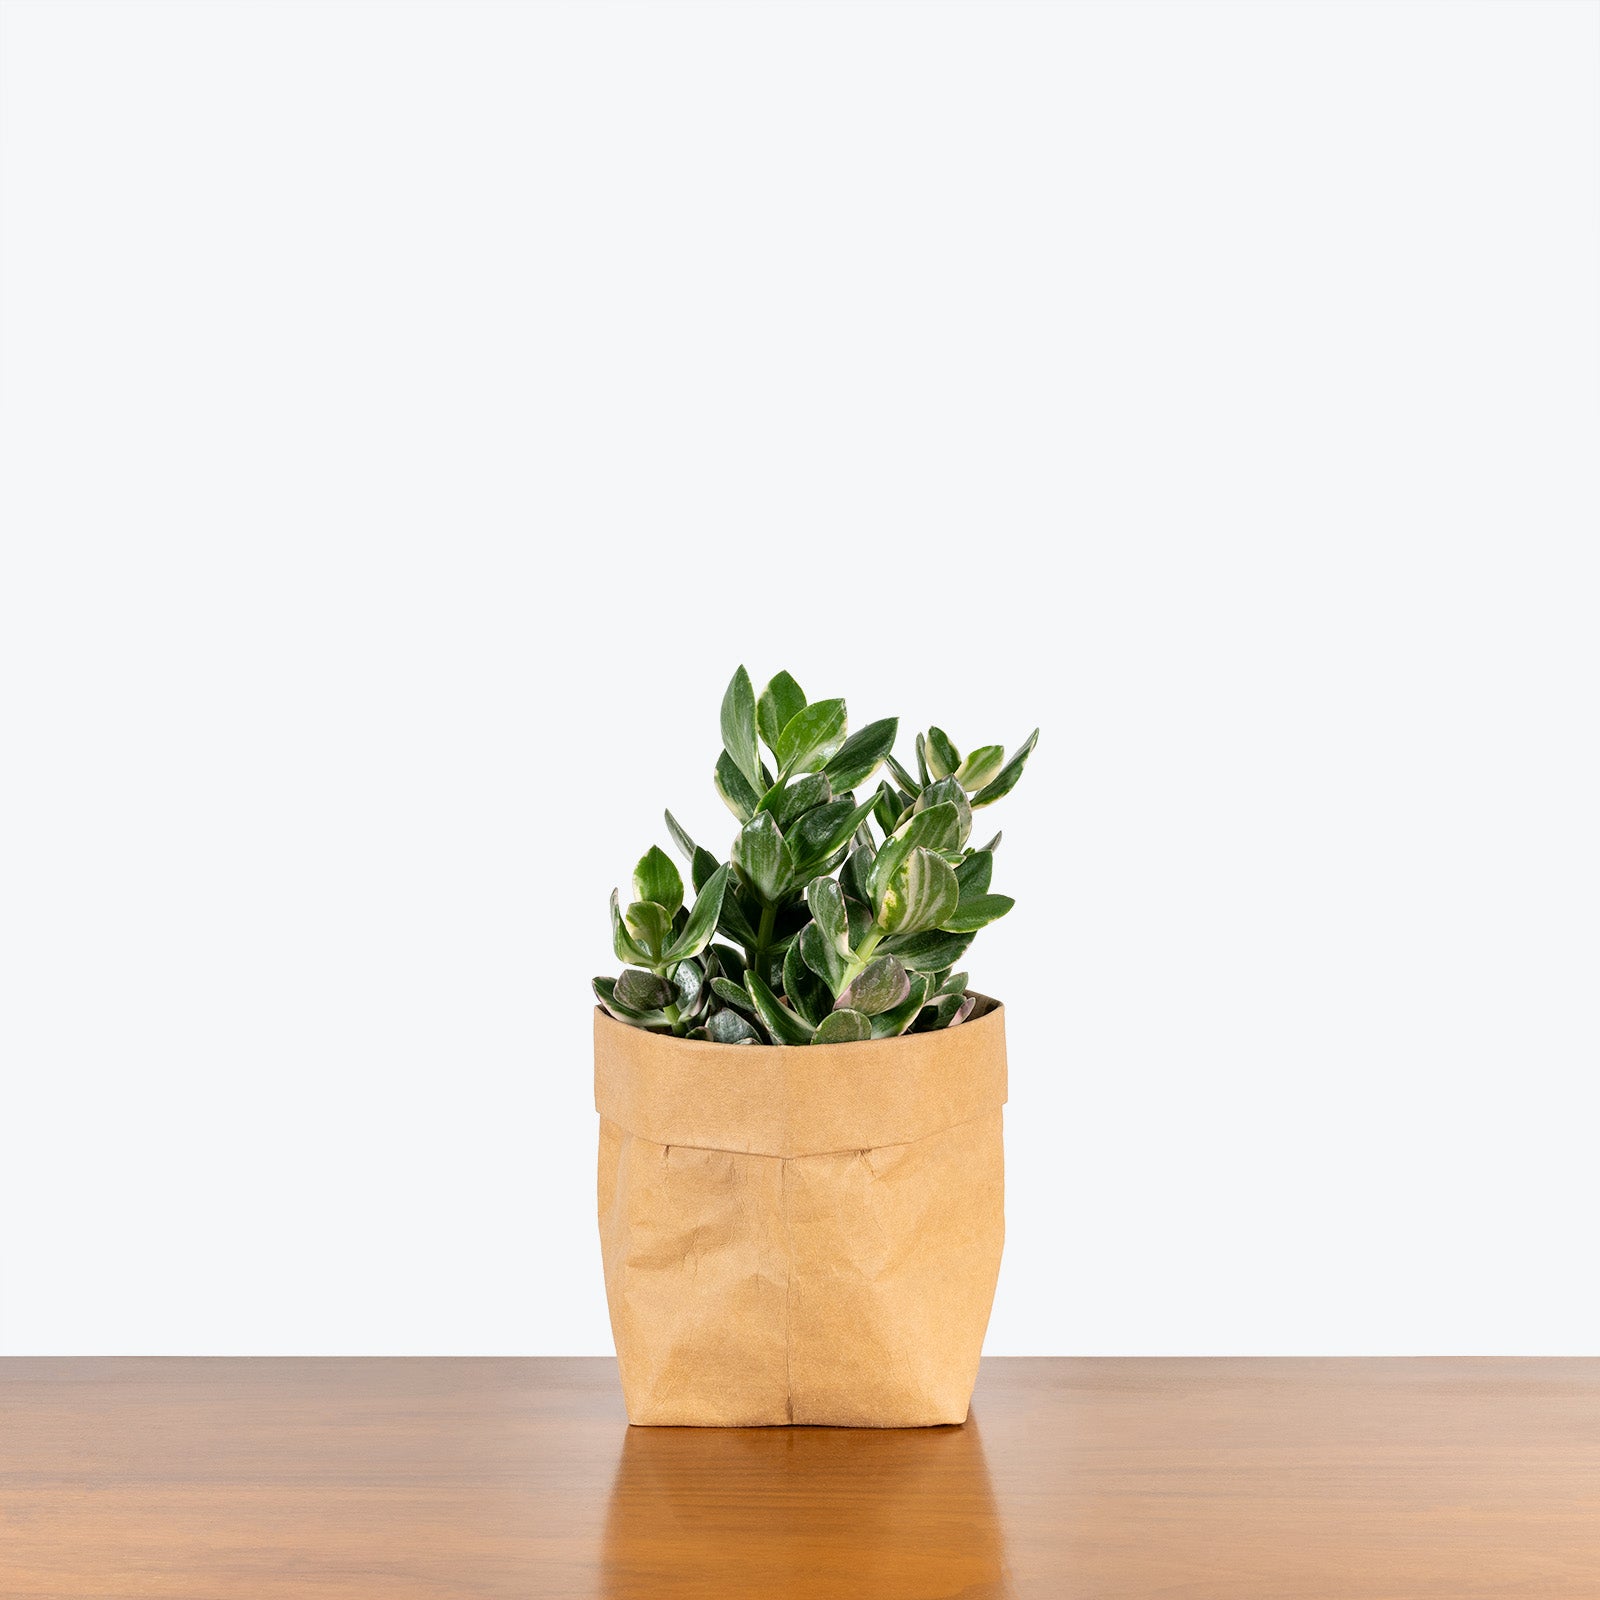 Variegated Jade Plant | Crassula Ovata Tricolor | Care Guide and Pro Tips - Delivery from Toronto across Canada - JOMO Studio